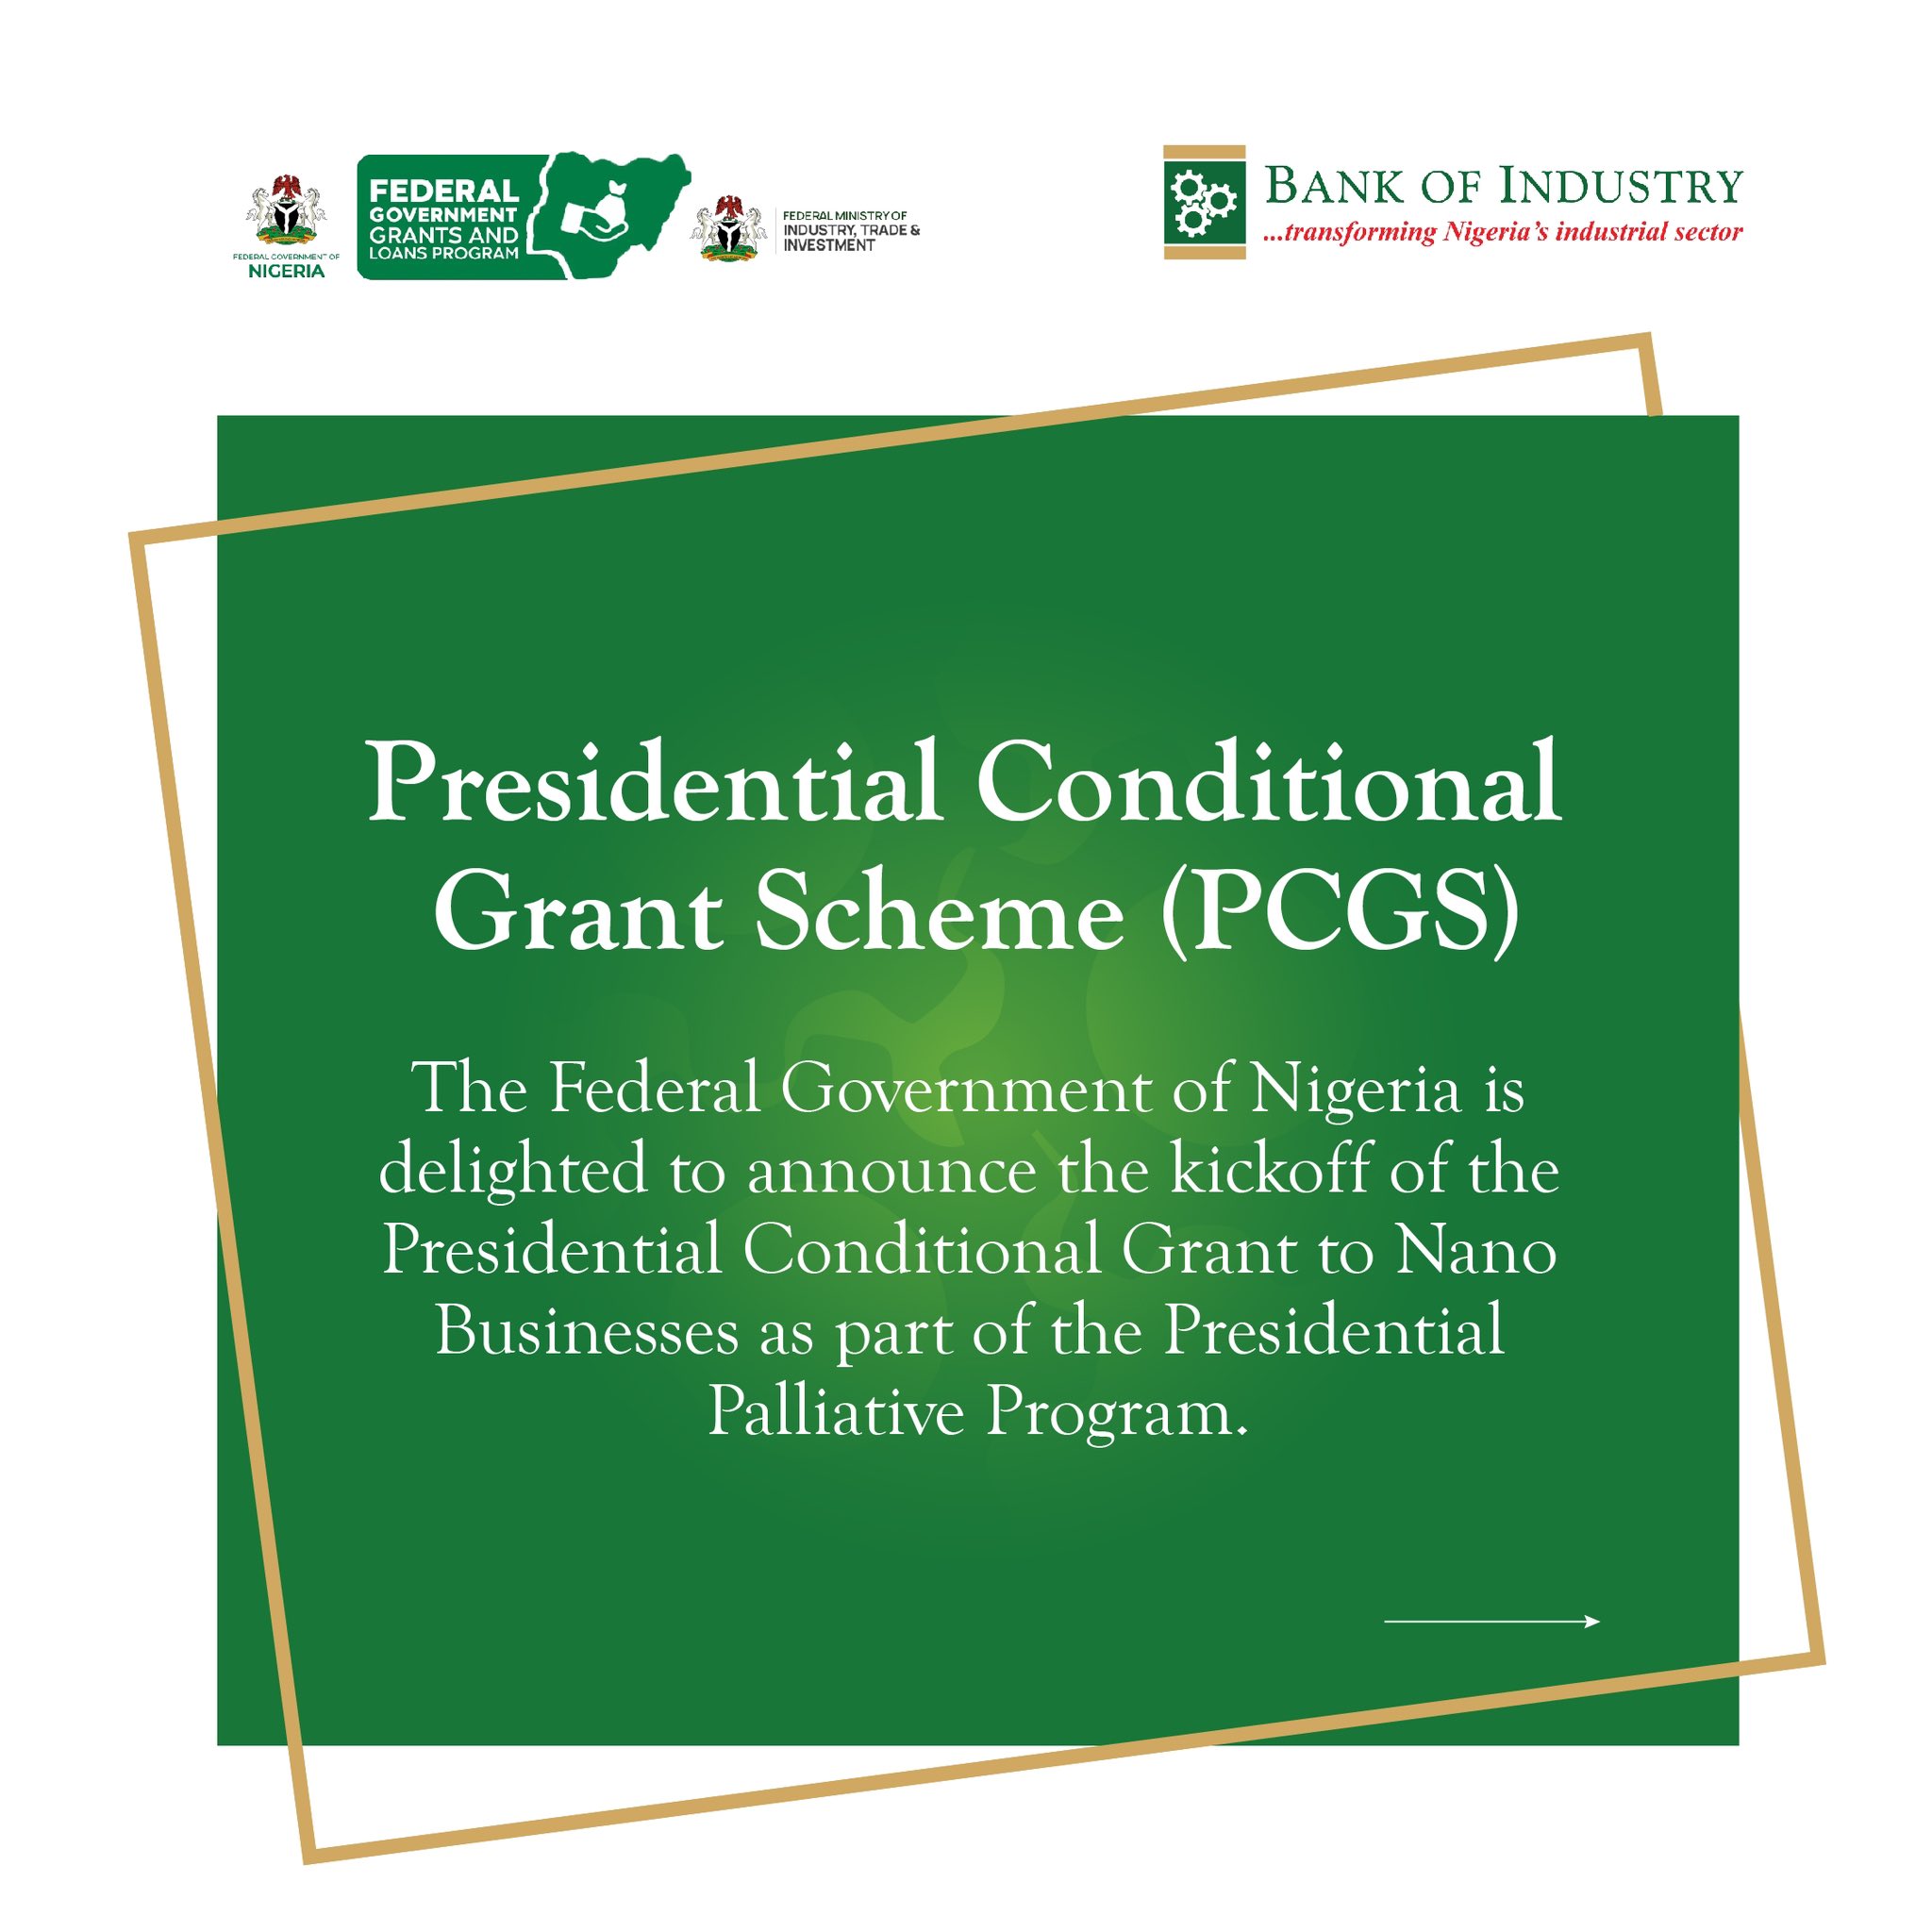 The Nigerian Government has begun the disbursement of the Presidential Conditional Grant Scheme (PCGS) to empower Nano businesses